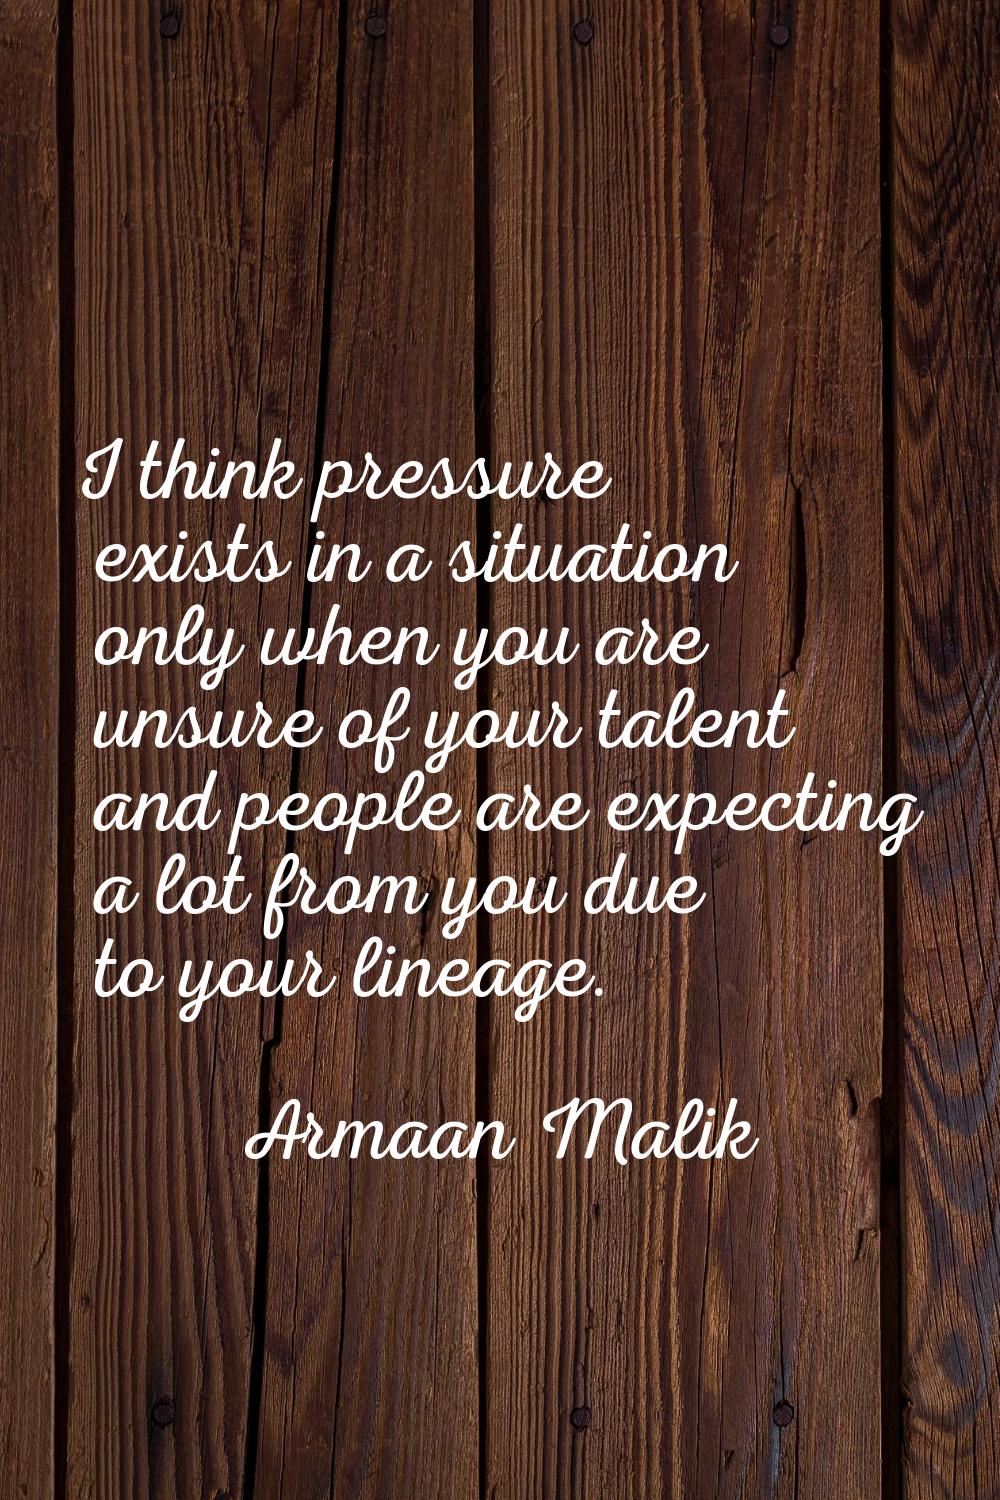 I think pressure exists in a situation only when you are unsure of your talent and people are expec